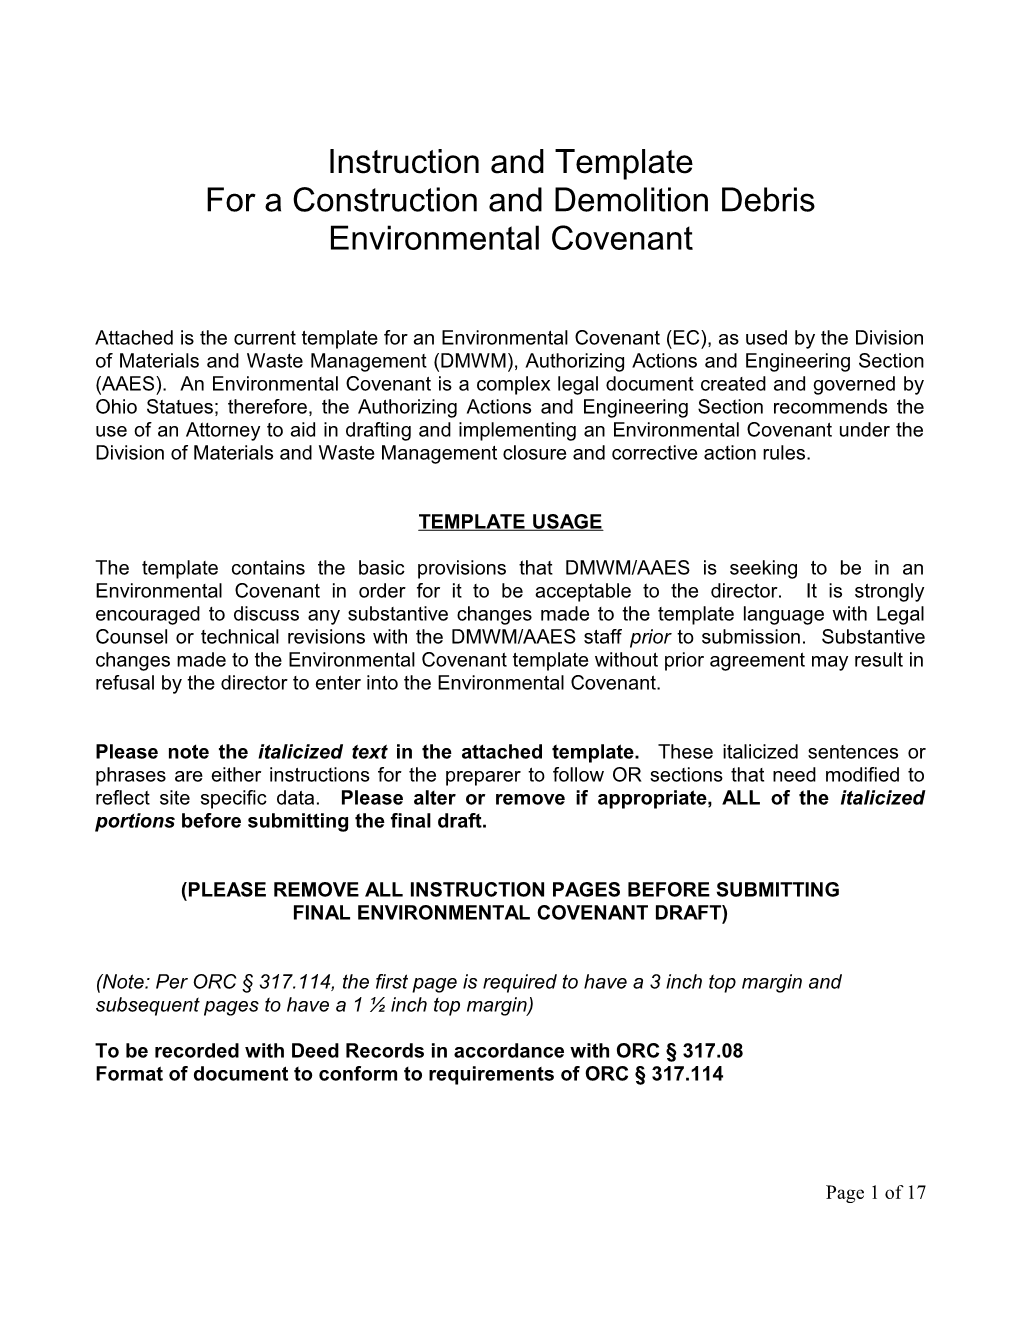 For a Construction and Demolition Debris Environmental Covenant